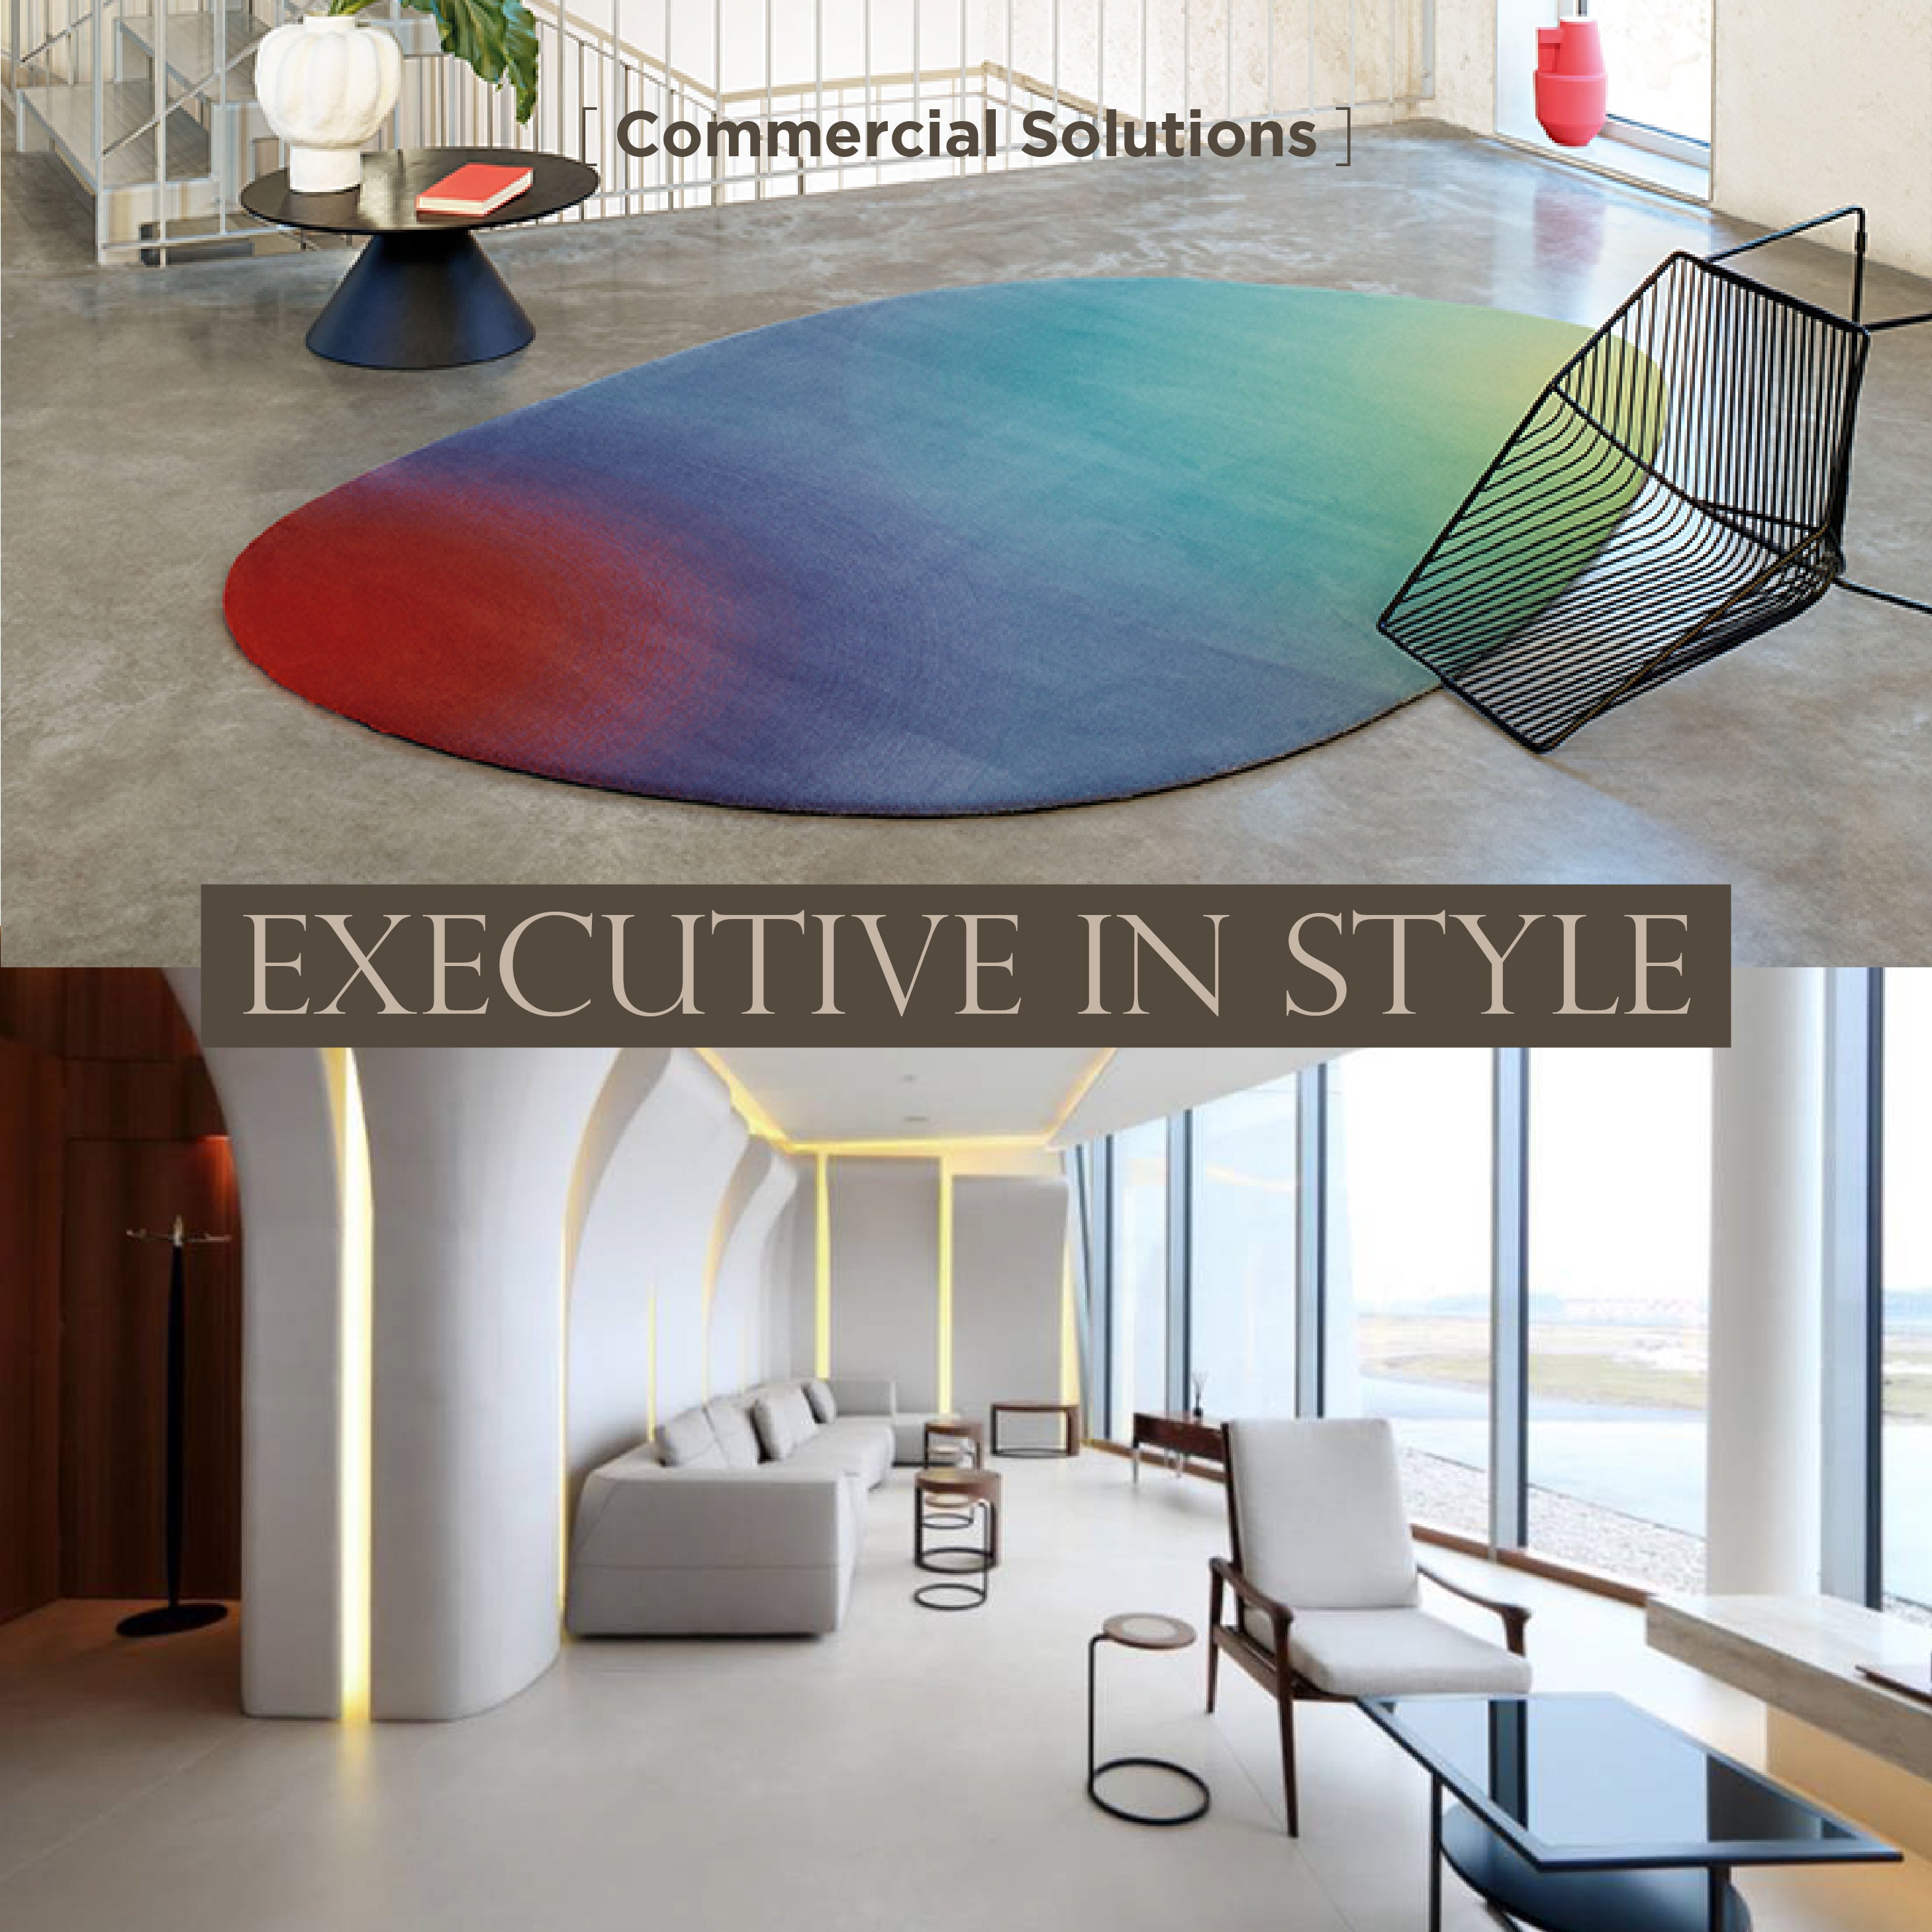 COLOURLIVING | COMMERCIAL SOLUTIONS | EXECUTIVE IN STYLE